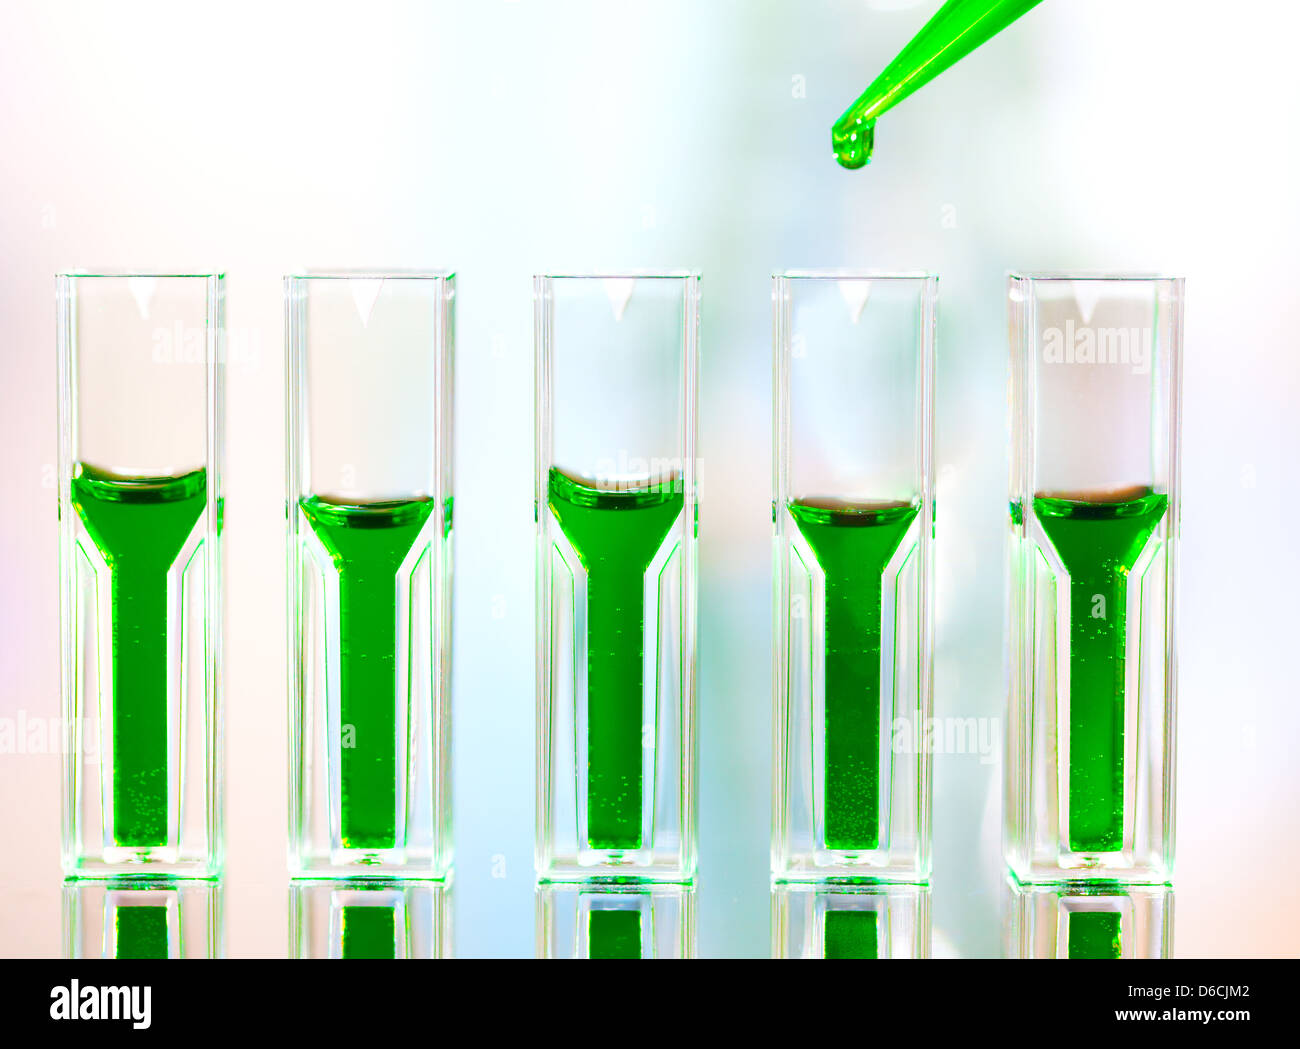 Spectrophotometer quvettes on a reflective surface, copy space Stock Photo